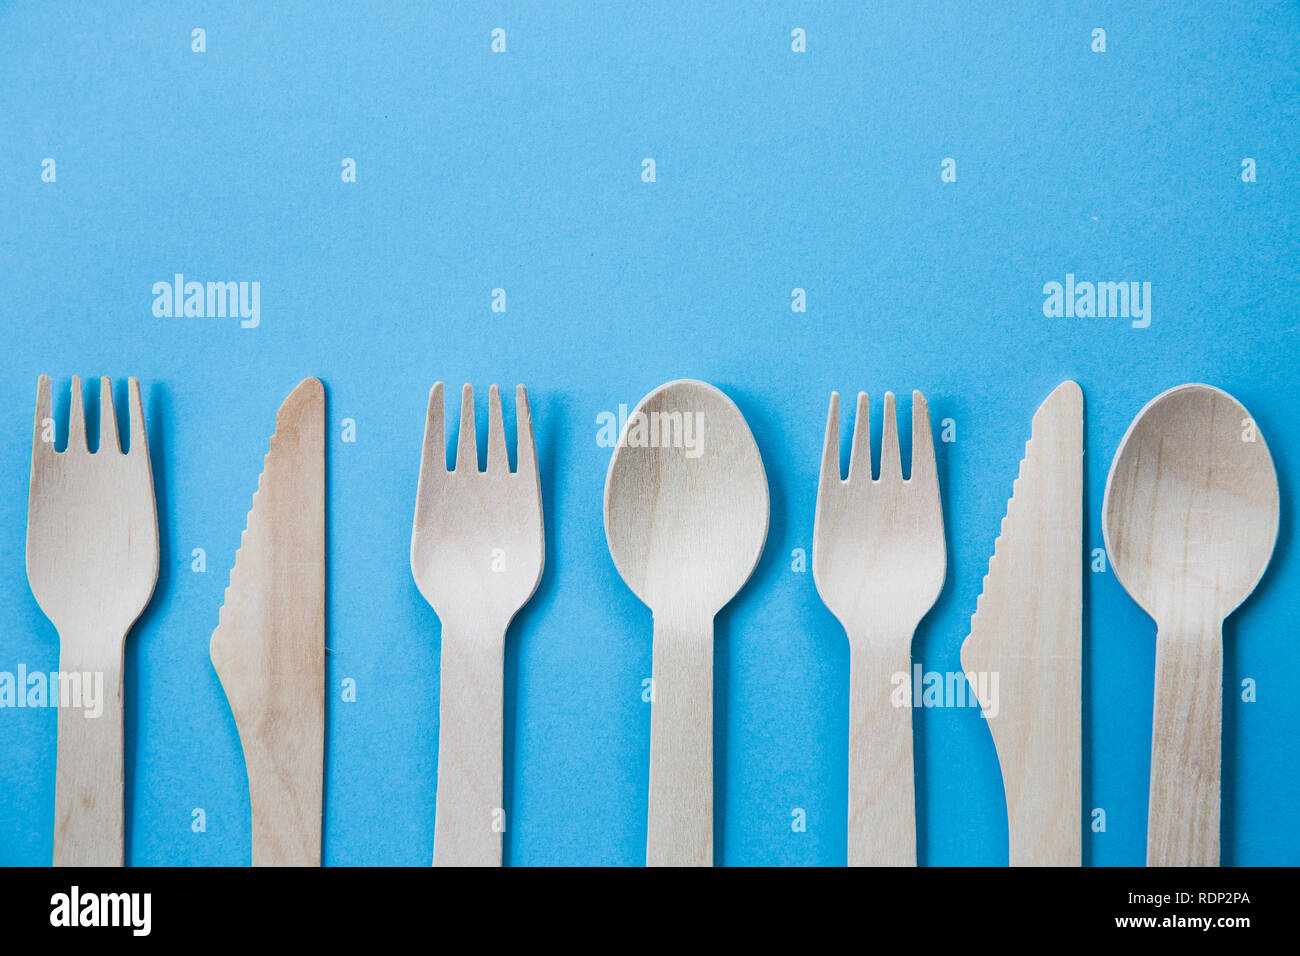 A variety of recyclable wooden cutlery including knife, fork and spoon on a blue background Stock Photo